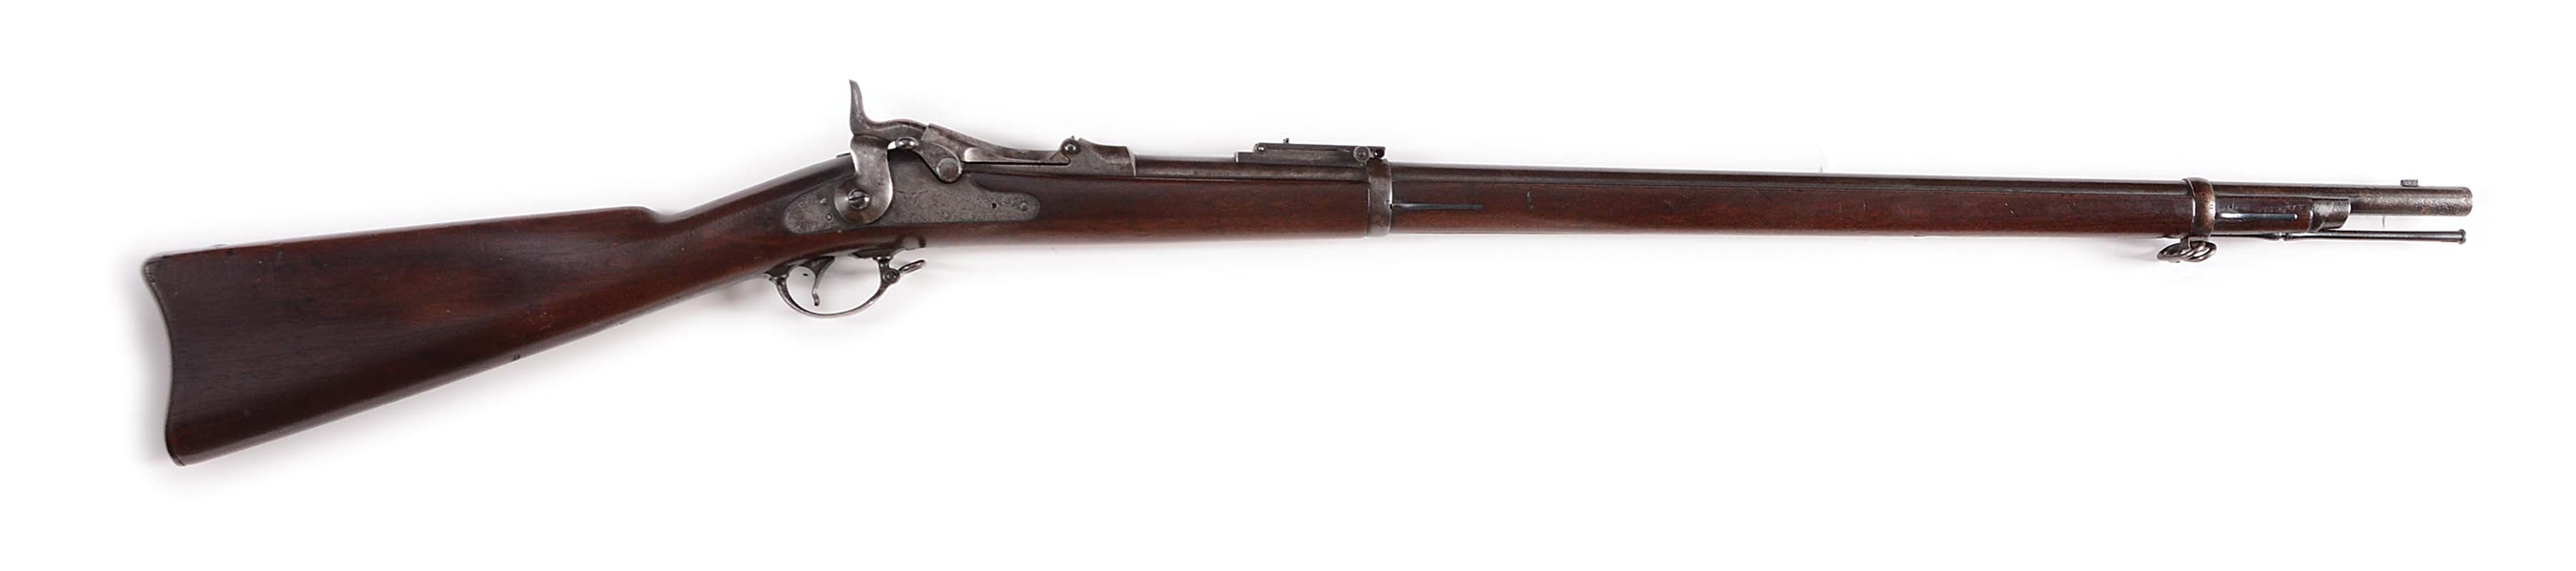 (A) SPRINGFIELD US 1884 TRAPDOOR RIFLE, DATED 1890.